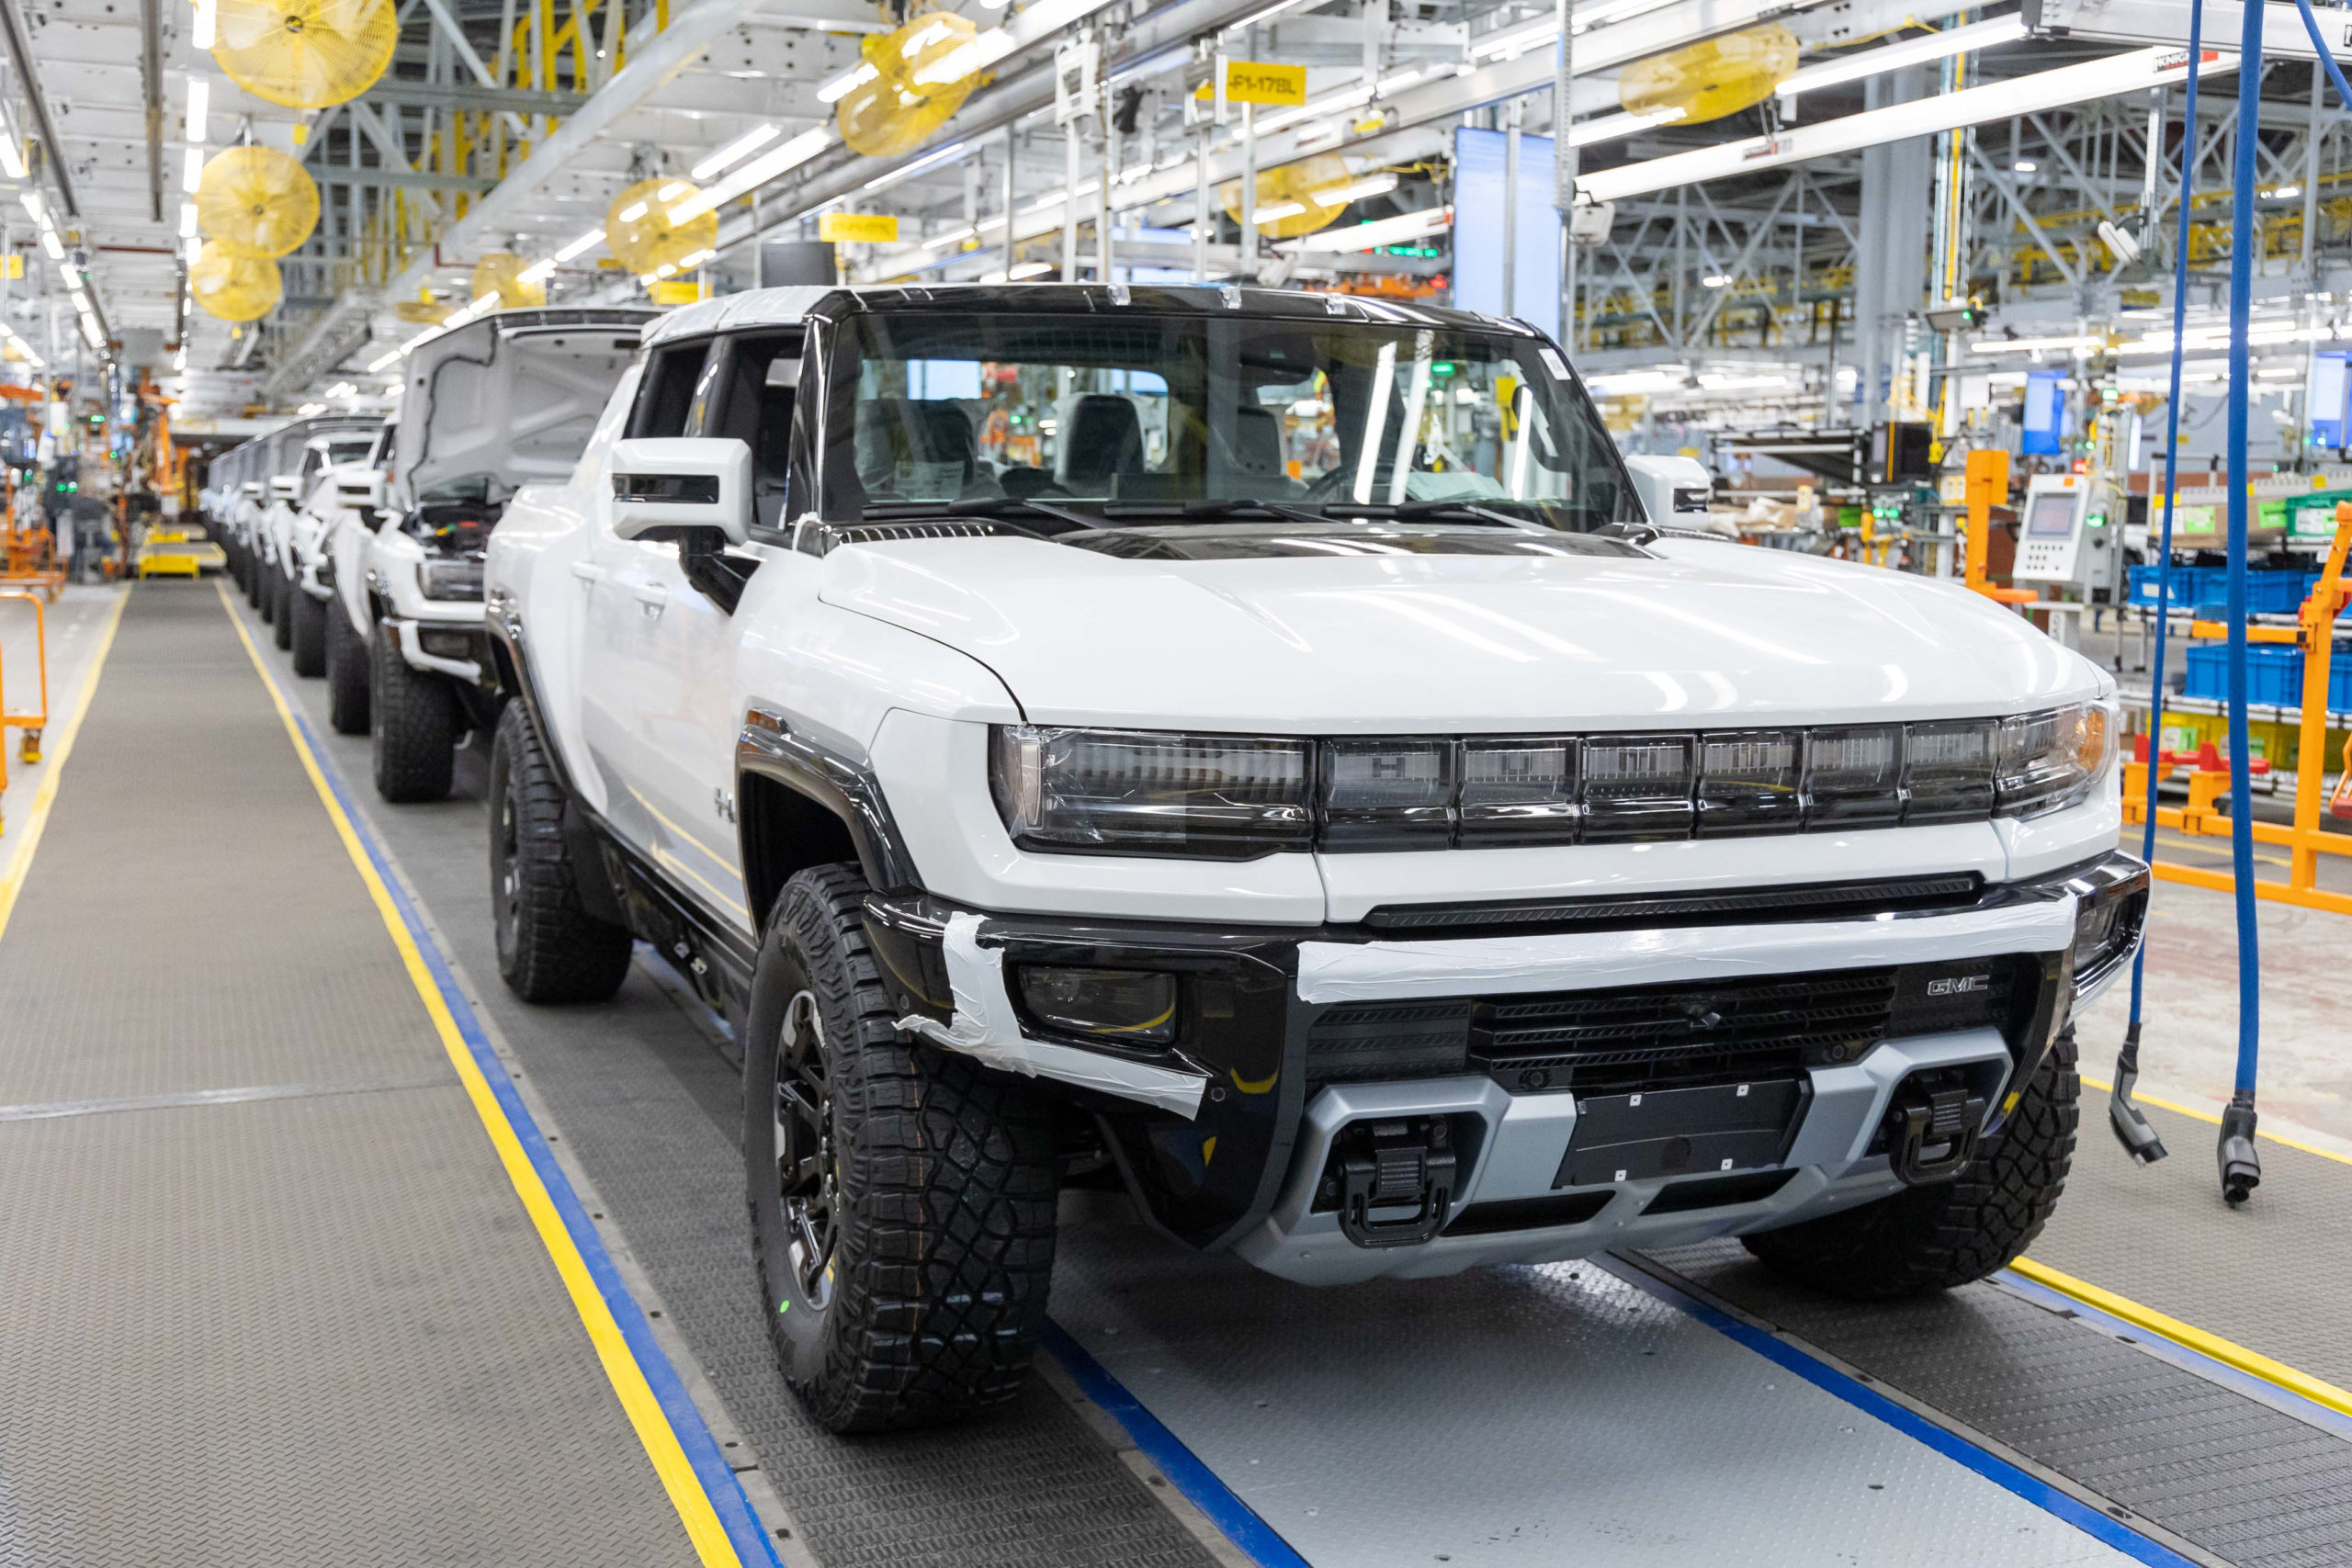 Production is now set to begin at the former Detroit-Hamtramck assembly plant, less than two years after GM announced the massive US$2.2 billion investment to fully renovate the facility to build a variety of all-electric trucks and SUVs. Pre-production of the 2022 GMC HUMMER EV pickups began at Factory ZERO this fall and GMC HUMMER EV is on track to deliver the first vehicles to customers by the end of the year. (Photo by Jeffrey Sauger for General Motors)